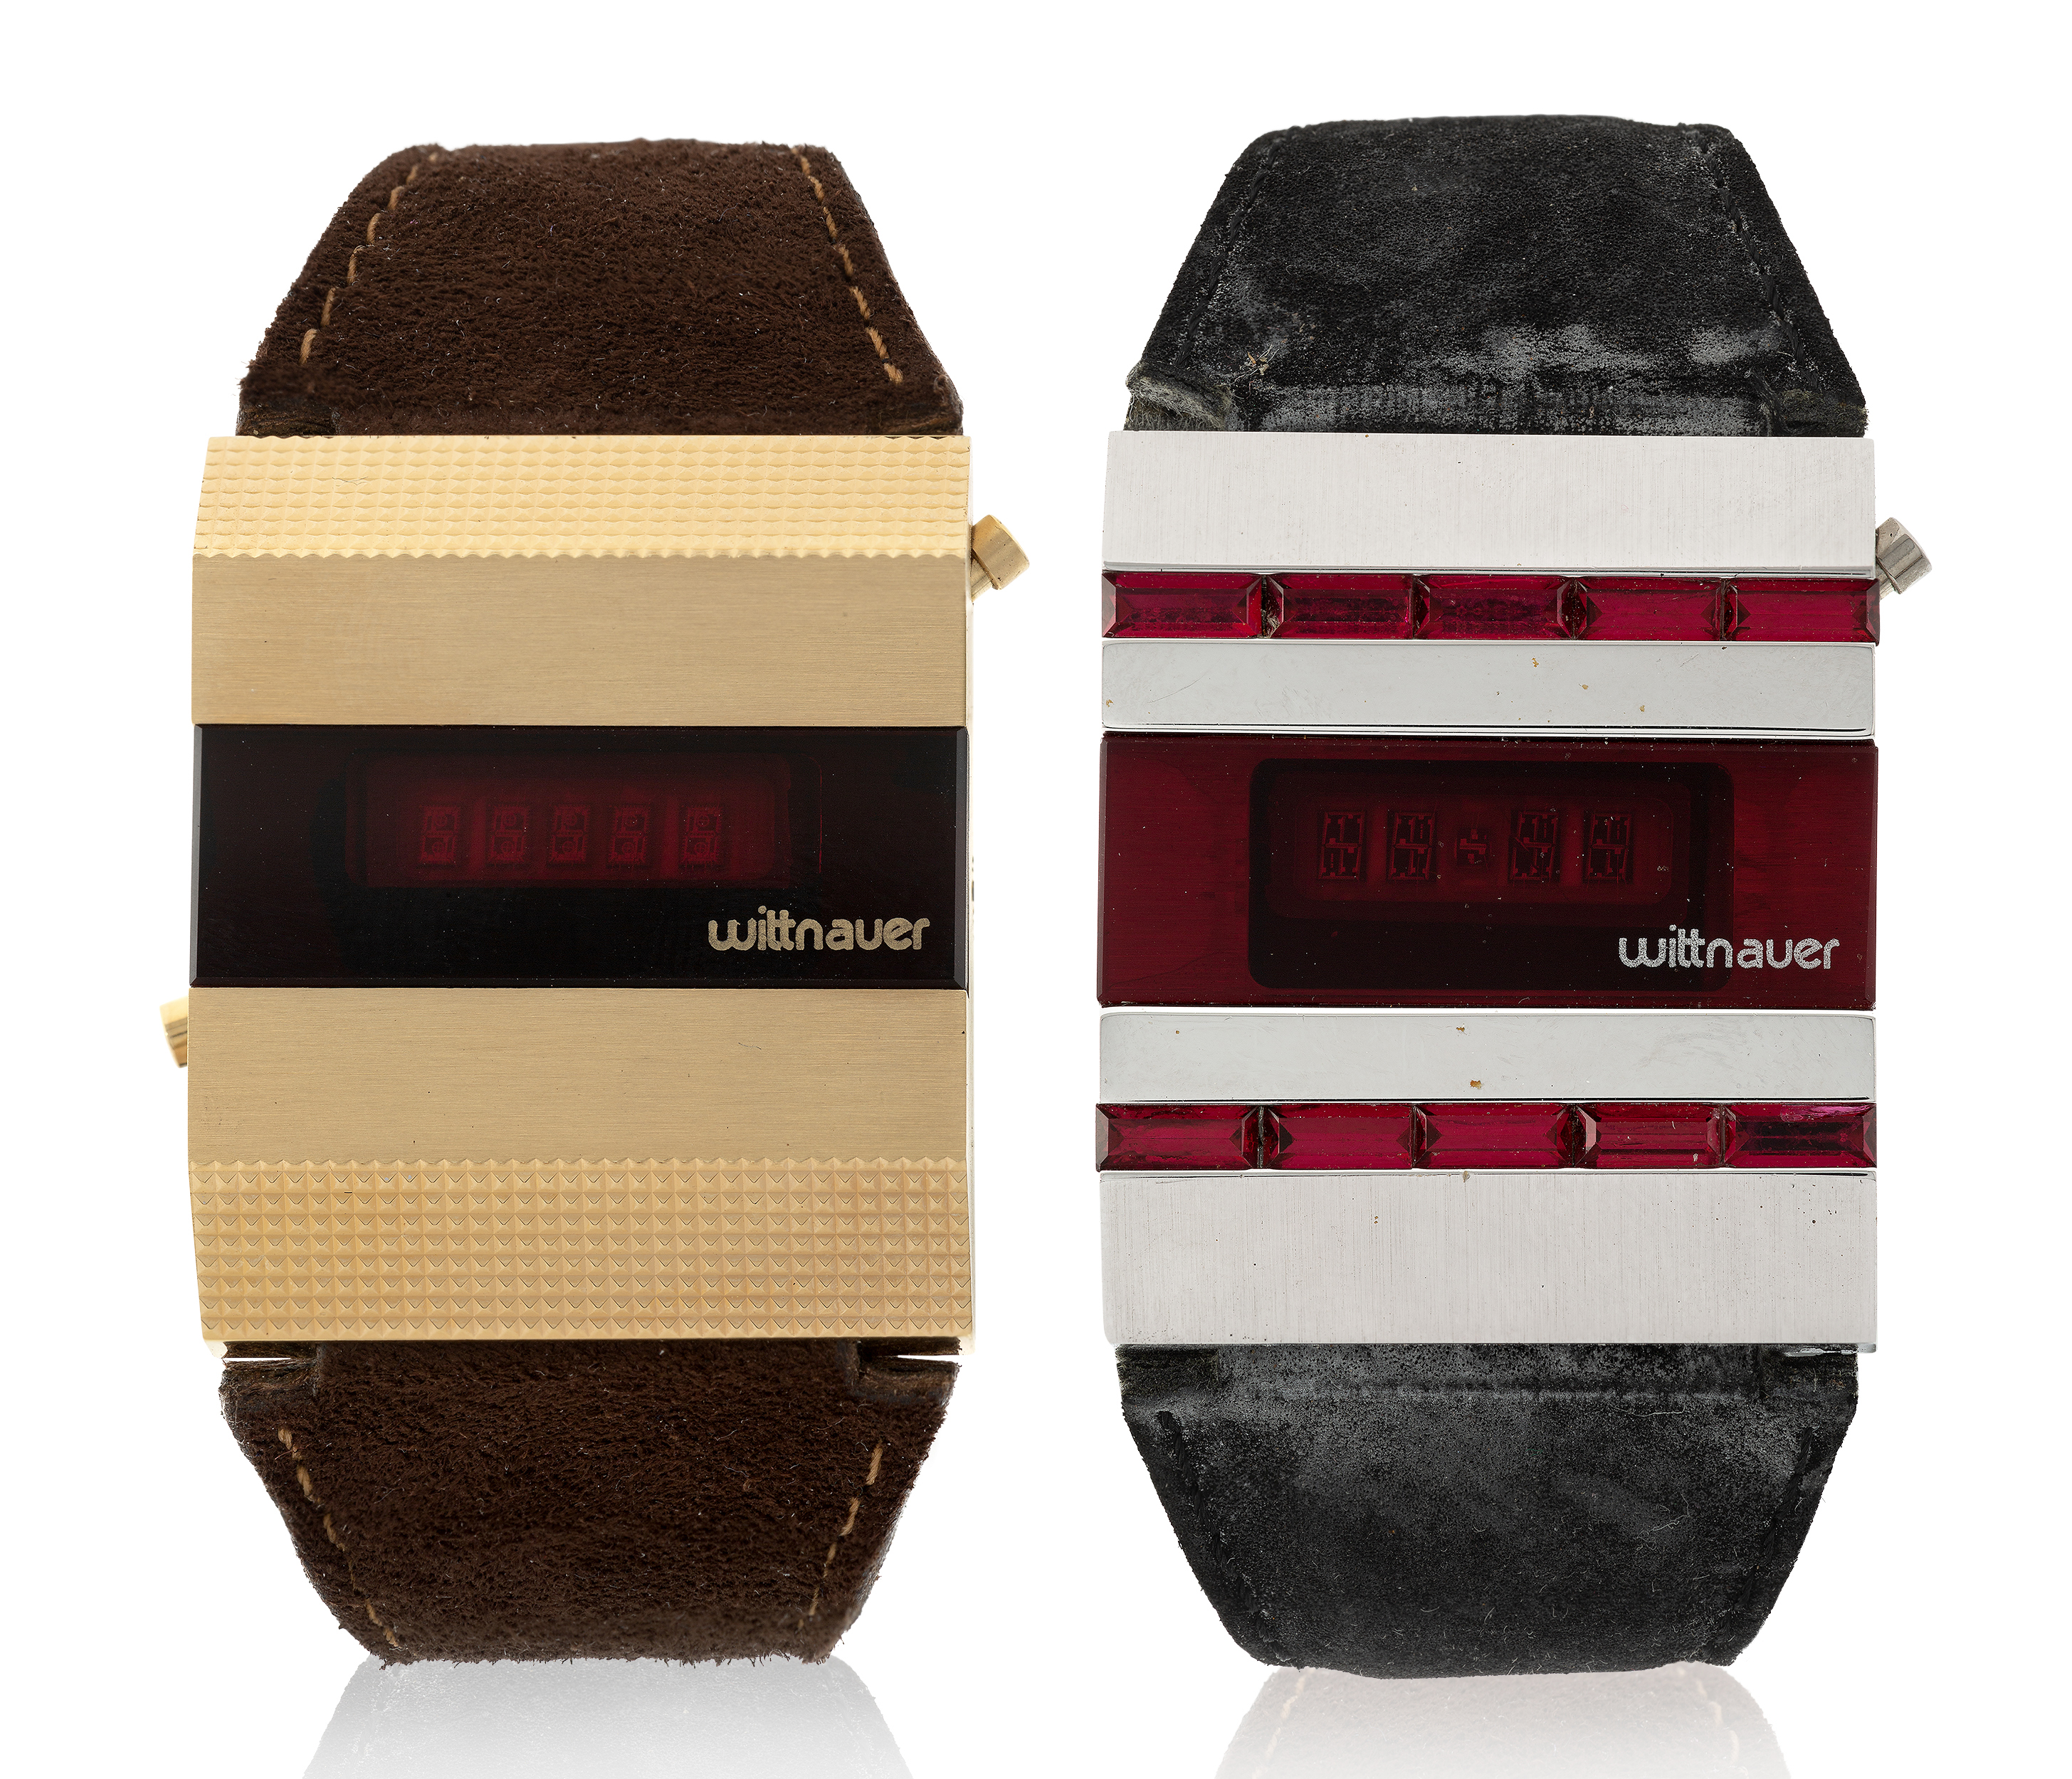 Two Wittnauer LED watches One in rolled gold case with red screen, the second in steel with red p...